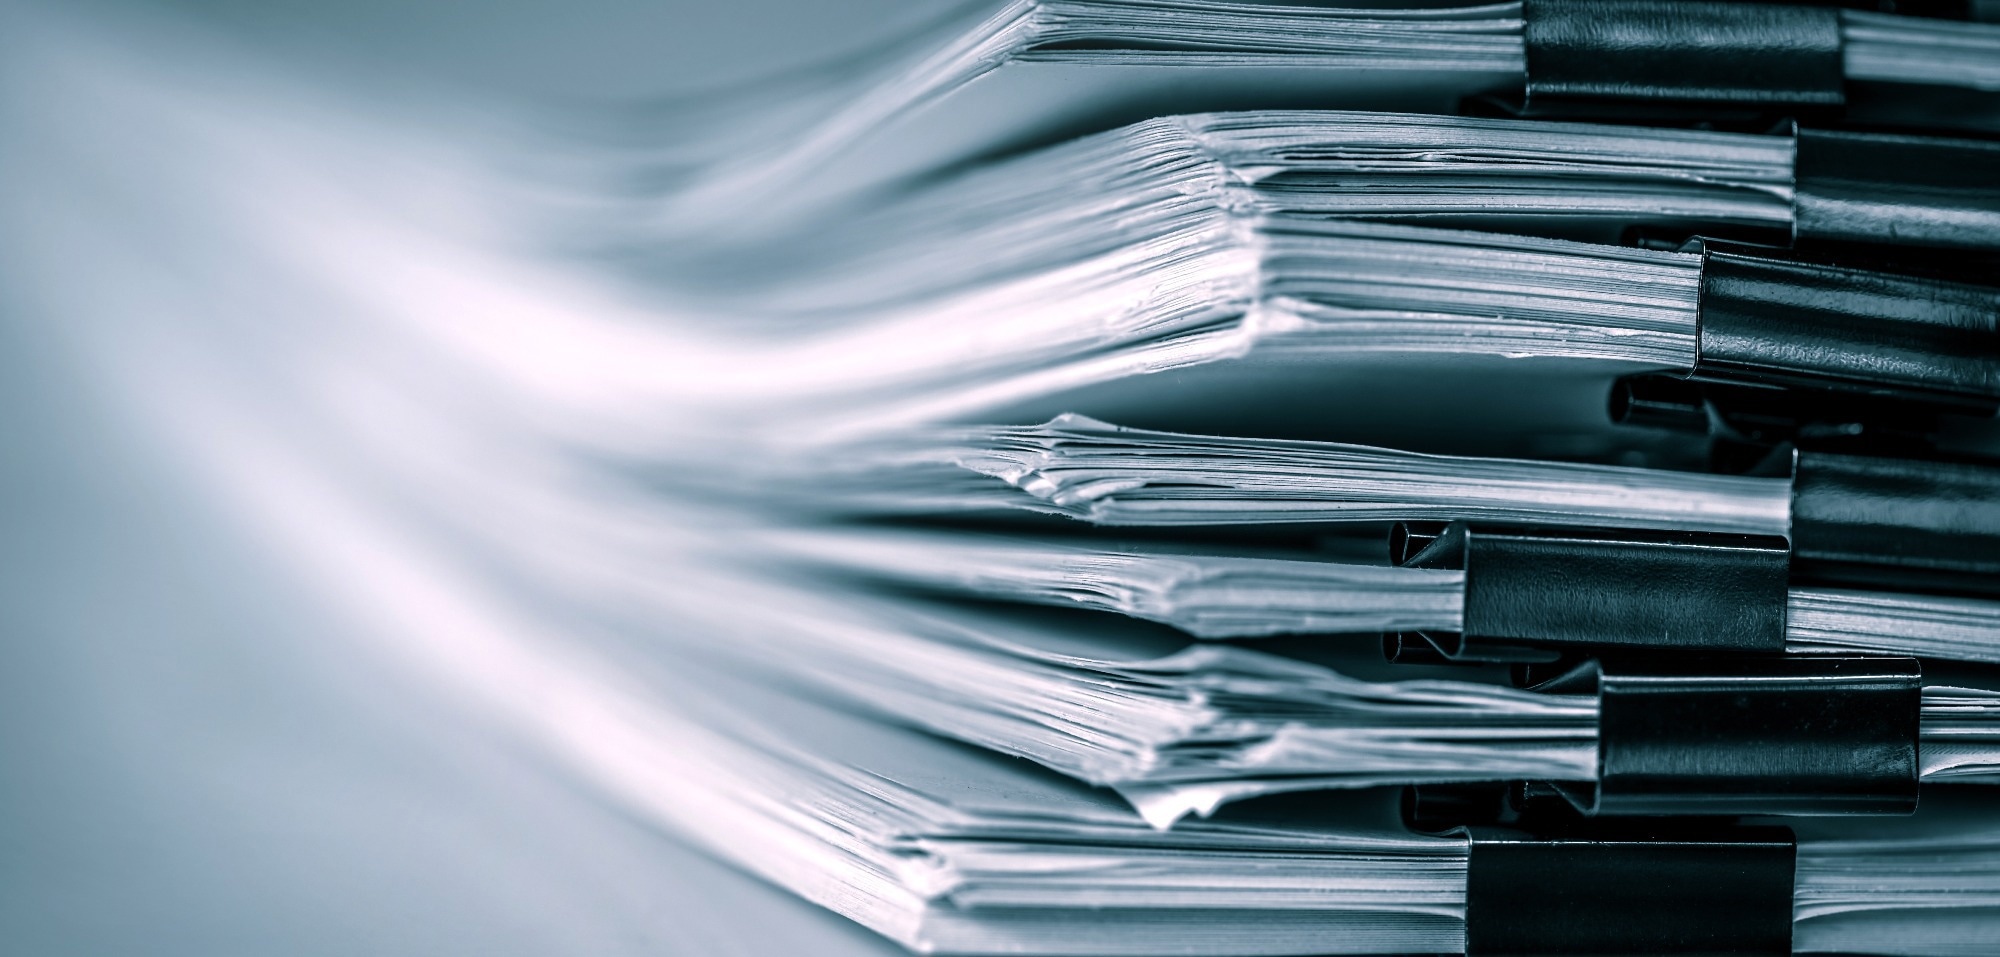 Study: Characteristics of Retracted Research Articles About COVID-19 vs Other Topics. Image Credit: Cozine/Shutterstock